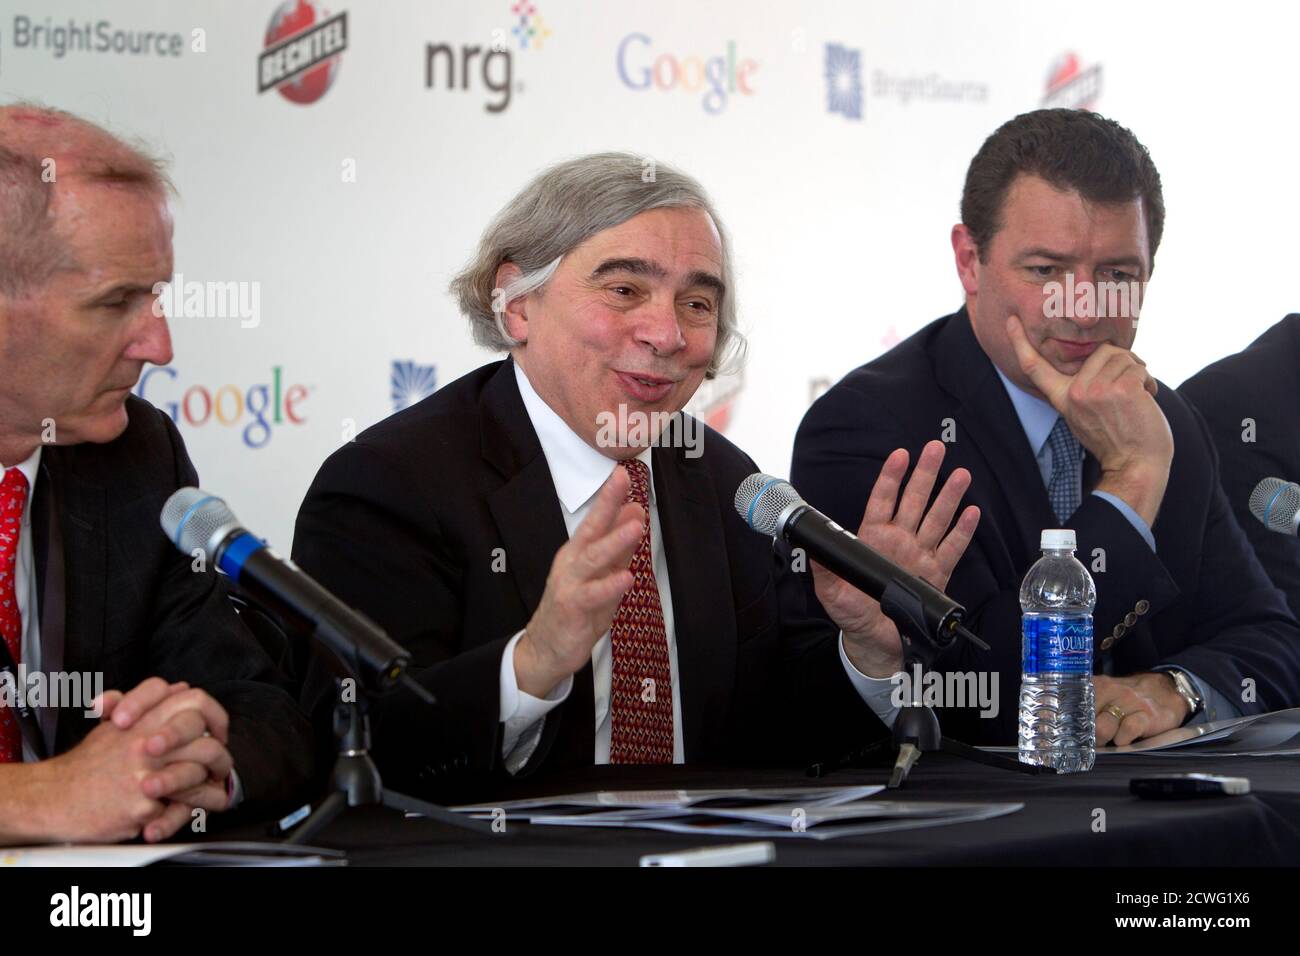 United States Secretary of Energy Ernest Moniz (C) responds to a reporter's question during the grand opening of the Ivanpah Solar Electric Generating System in the Mojave Desert near the California-Nevada border February 13, 2014. The project, a partnership of NRG, BrightSource, Google and Bechtel, is the world's largest solar thermal facility. With Moniz are David Crane (L), president/CEO of NRG, and Toby Seay, president of Bechtel Power. REUTERS/Steve Marcus (UNITED STATES - Tags: ENERGY BUSINESS SCIENCE TECHNOLOGY) Stock Photo